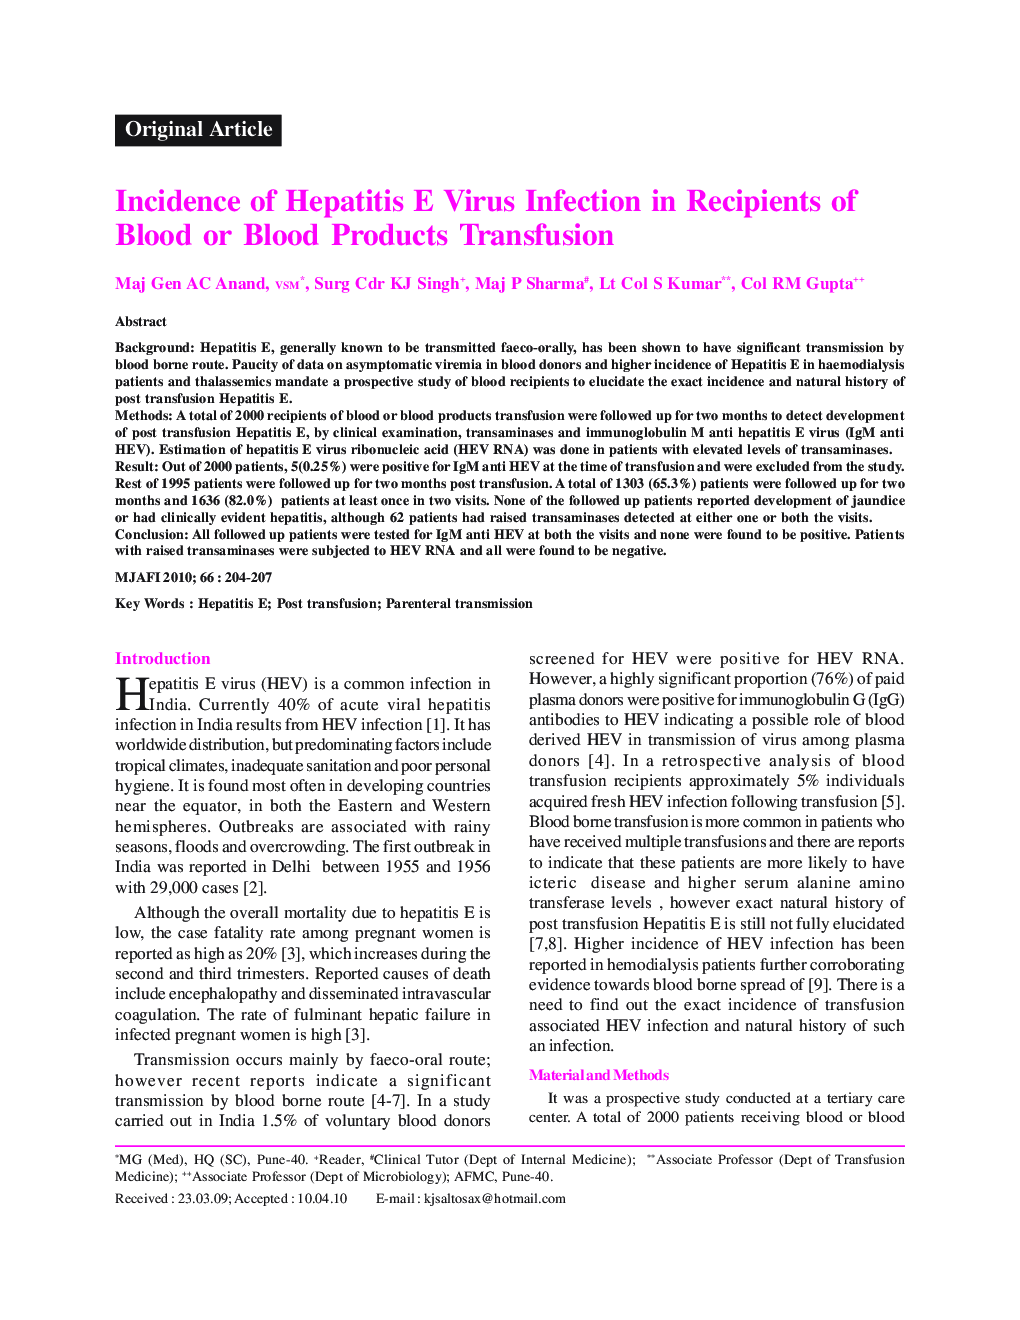 Incidence of Hepatitis E Virus Infection in Recipients of Blood or Blood Products Transfusion